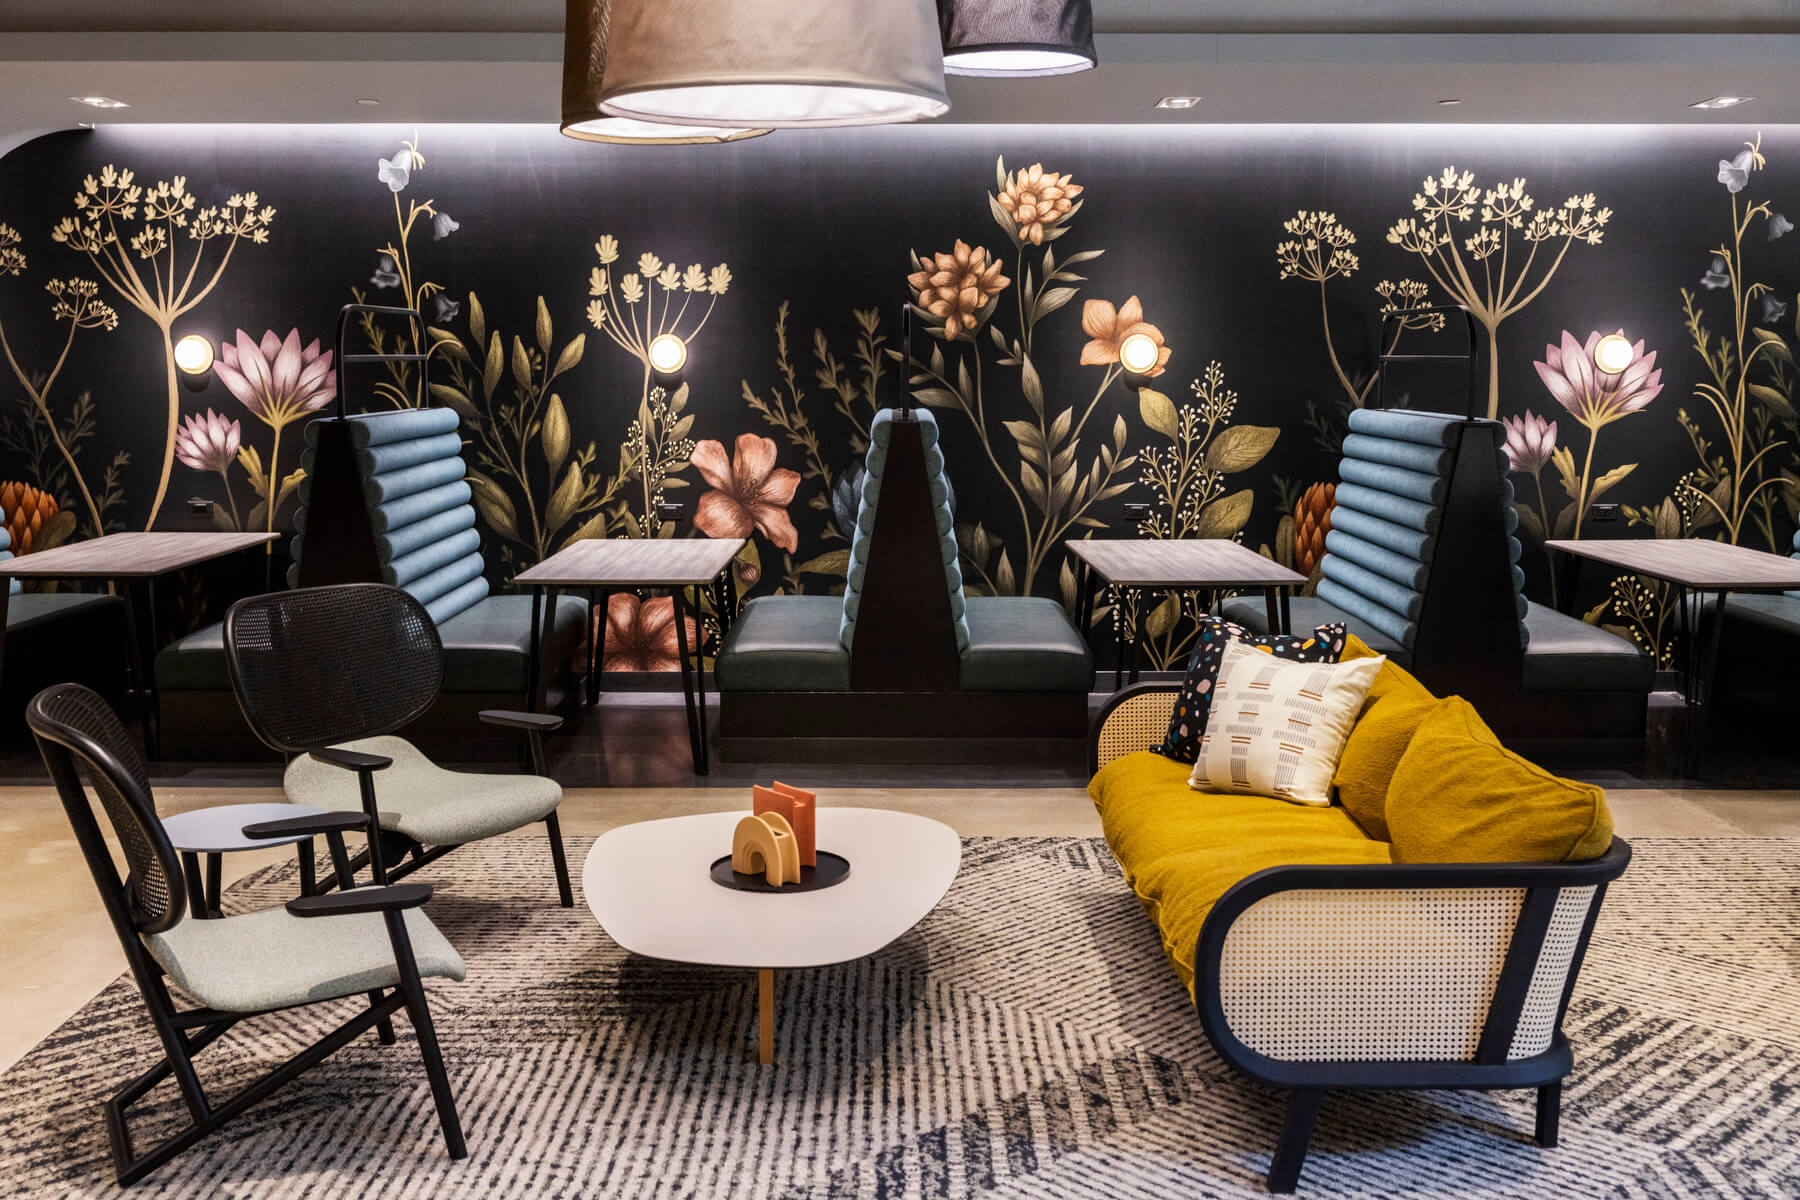 An image of a dining area at Amazon HQ2. There are several seats in jewel tones and floral wallpaper on the walls.